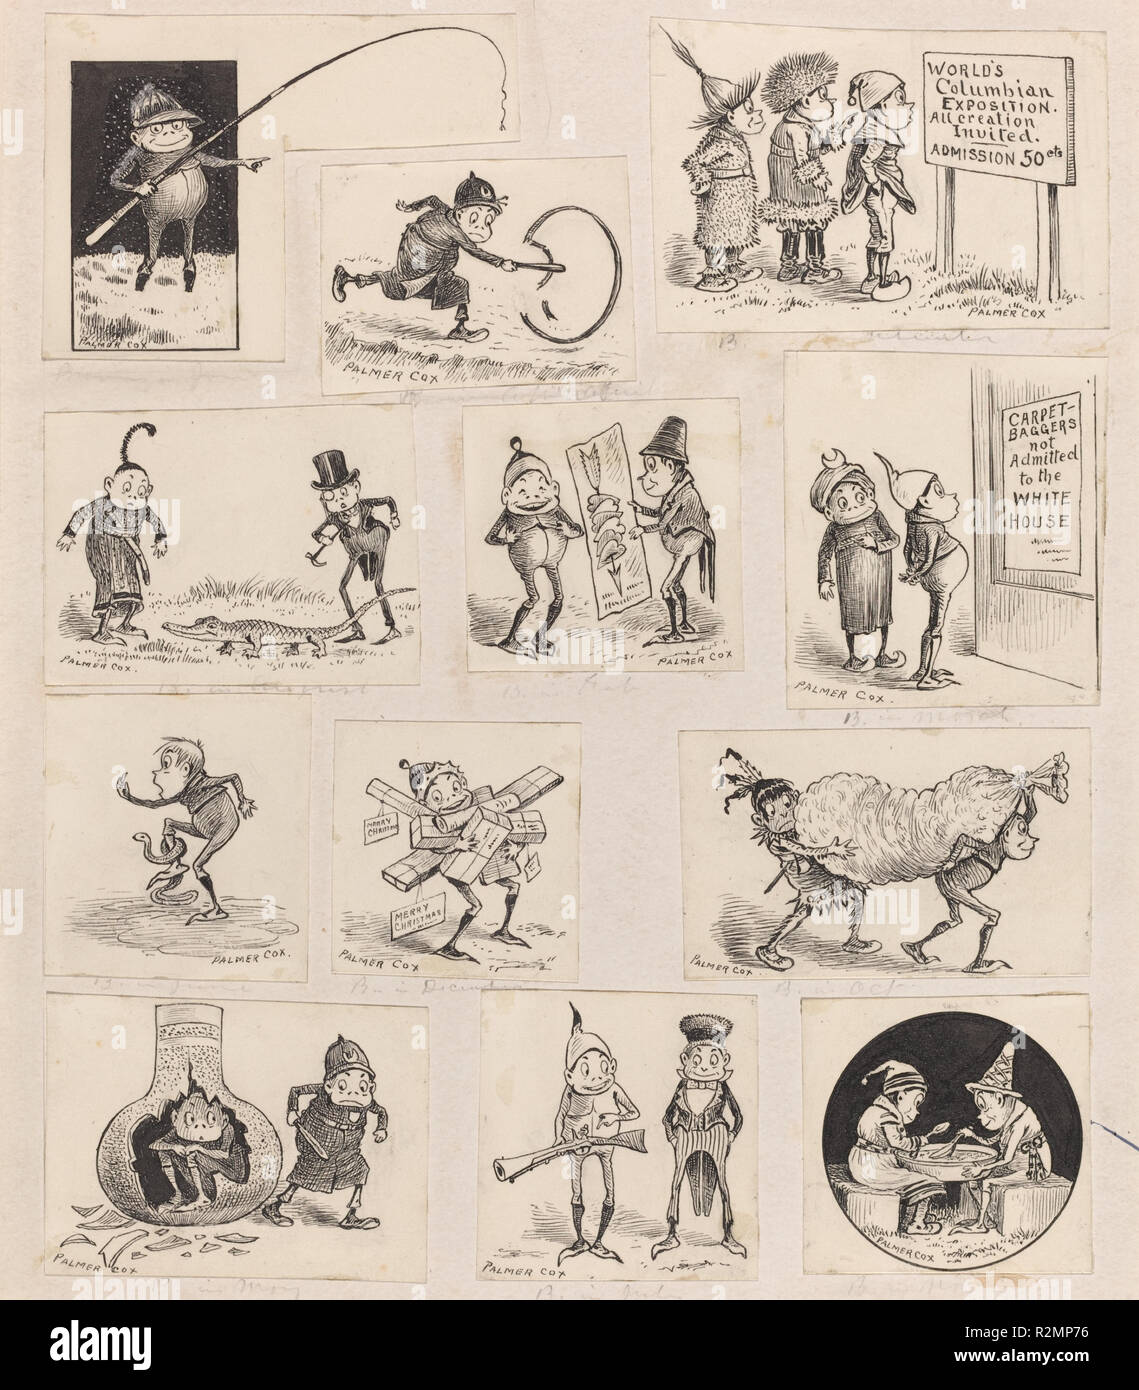 Brownies at Home - Twelve Vignettes. Dated: c. 1893. Dimensions: support: 33.2 x 28 cm (13 1/16 x 11 in.). Medium: pen and black ink on twelve pieces of wove paper. Museum: National Gallery of Art, Washington DC. Author: Palmer Cox. Stock Photo